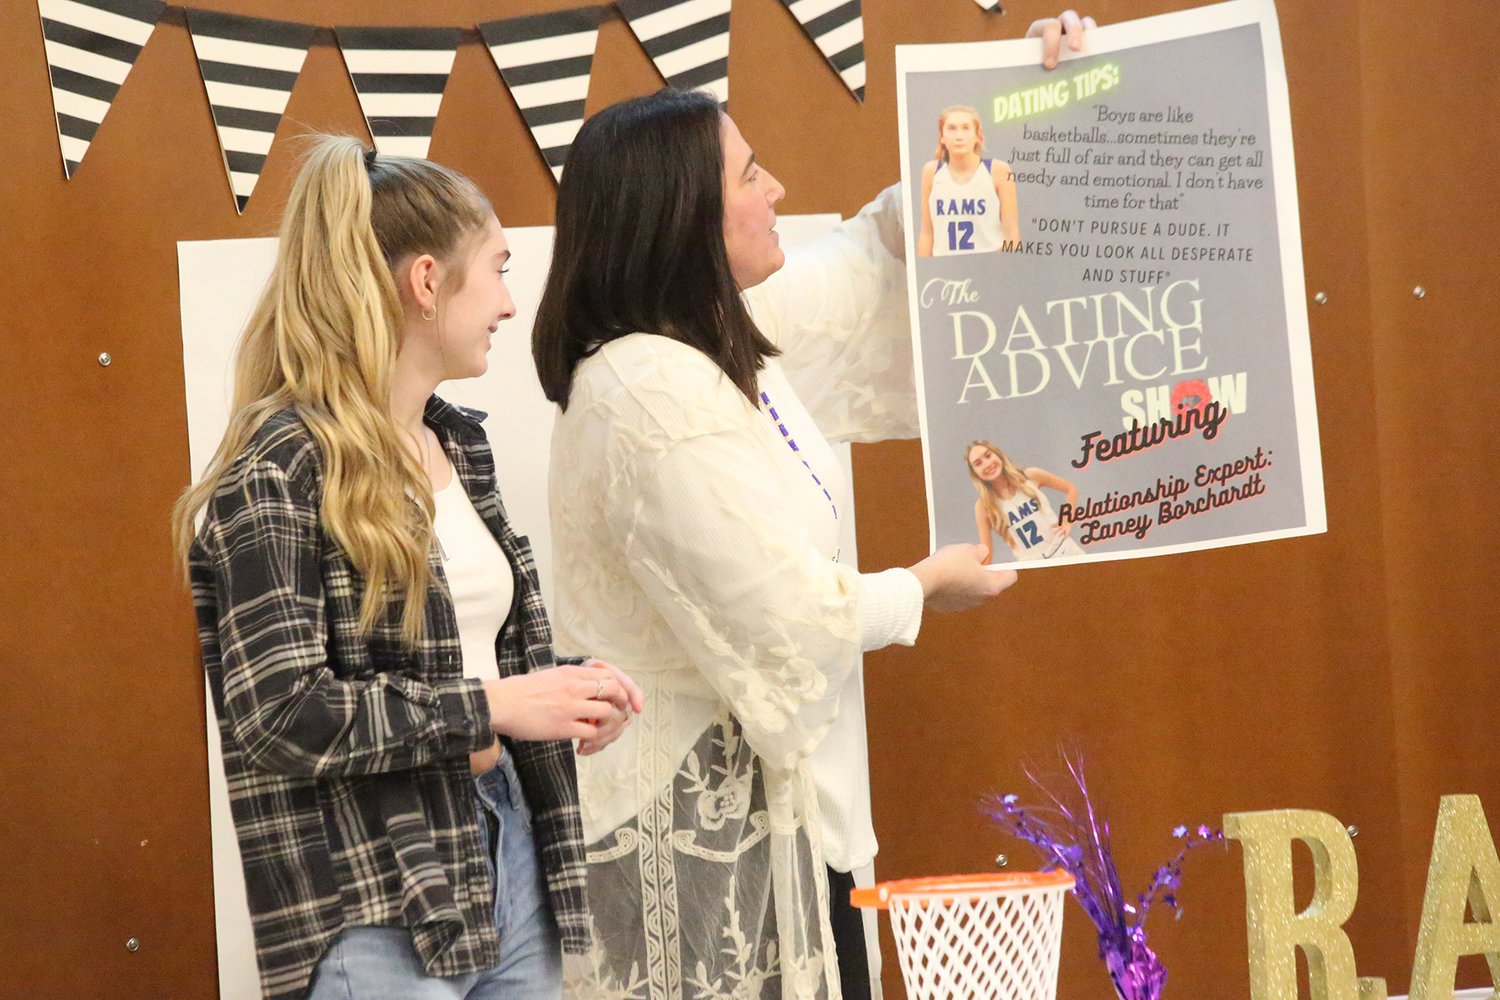 Lady Ram Laney Borchard looks on as Coach Jackie Meyer admires the poster the team made for her.